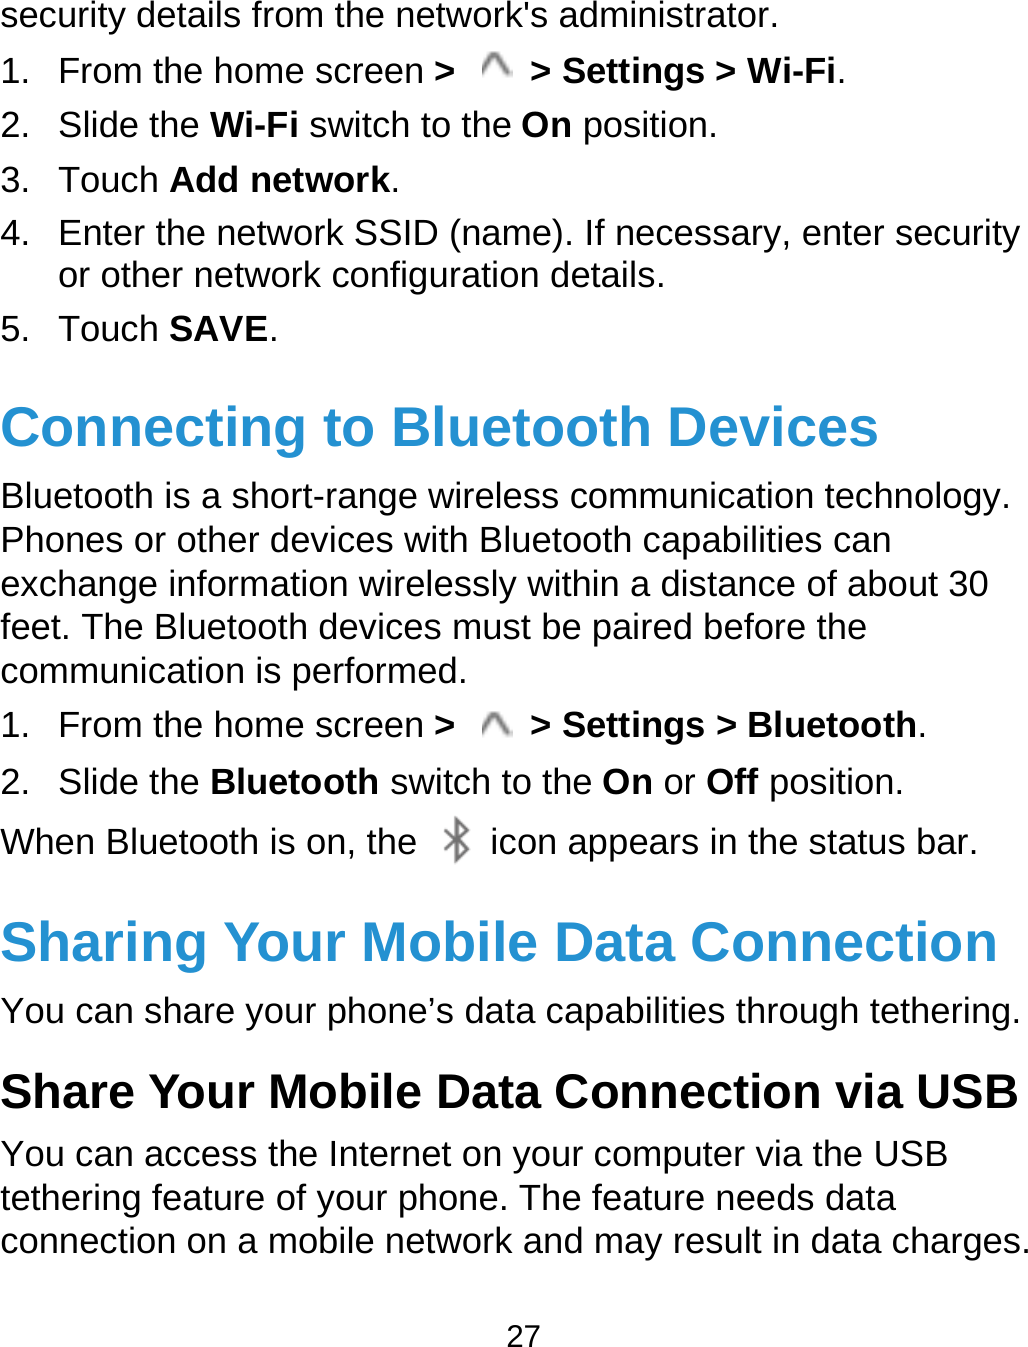  27 security details from the network&apos;s administrator. 1.  From the home screen &gt;    &gt; Settings &gt; Wi-Fi. 2. Slide the Wi-Fi switch to the On position. 3. Touch Add network. 4.  Enter the network SSID (name). If necessary, enter security or other network configuration details. 5. Touch SAVE. Connecting to Bluetooth Devices Bluetooth is a short-range wireless communication technology. Phones or other devices with Bluetooth capabilities can exchange information wirelessly within a distance of about 30 feet. The Bluetooth devices must be paired before the communication is performed. 1.  From the home screen &gt;    &gt; Settings &gt; Bluetooth. 2. Slide the Bluetooth switch to the On or Off position. When Bluetooth is on, the    icon appears in the status bar.   Sharing Your Mobile Data Connection You can share your phone’s data capabilities through tethering. Share Your Mobile Data Connection via USB You can access the Internet on your computer via the USB tethering feature of your phone. The feature needs data connection on a mobile network and may result in data charges. 